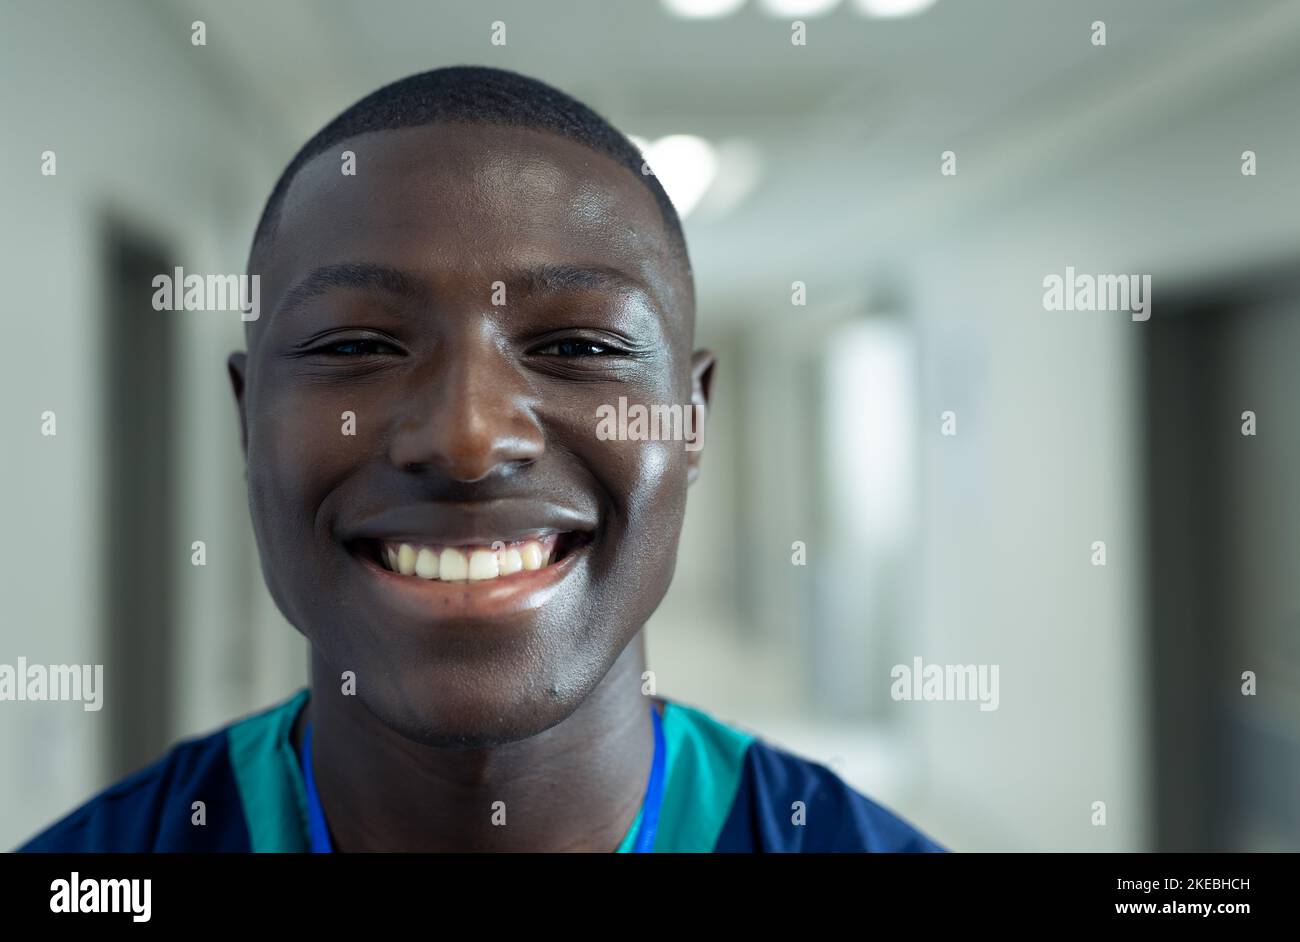 Portrait of smiling african american male healthcare worker in hospital corridor, copy space. Hospital, medical and healthcare services. Stock Photo